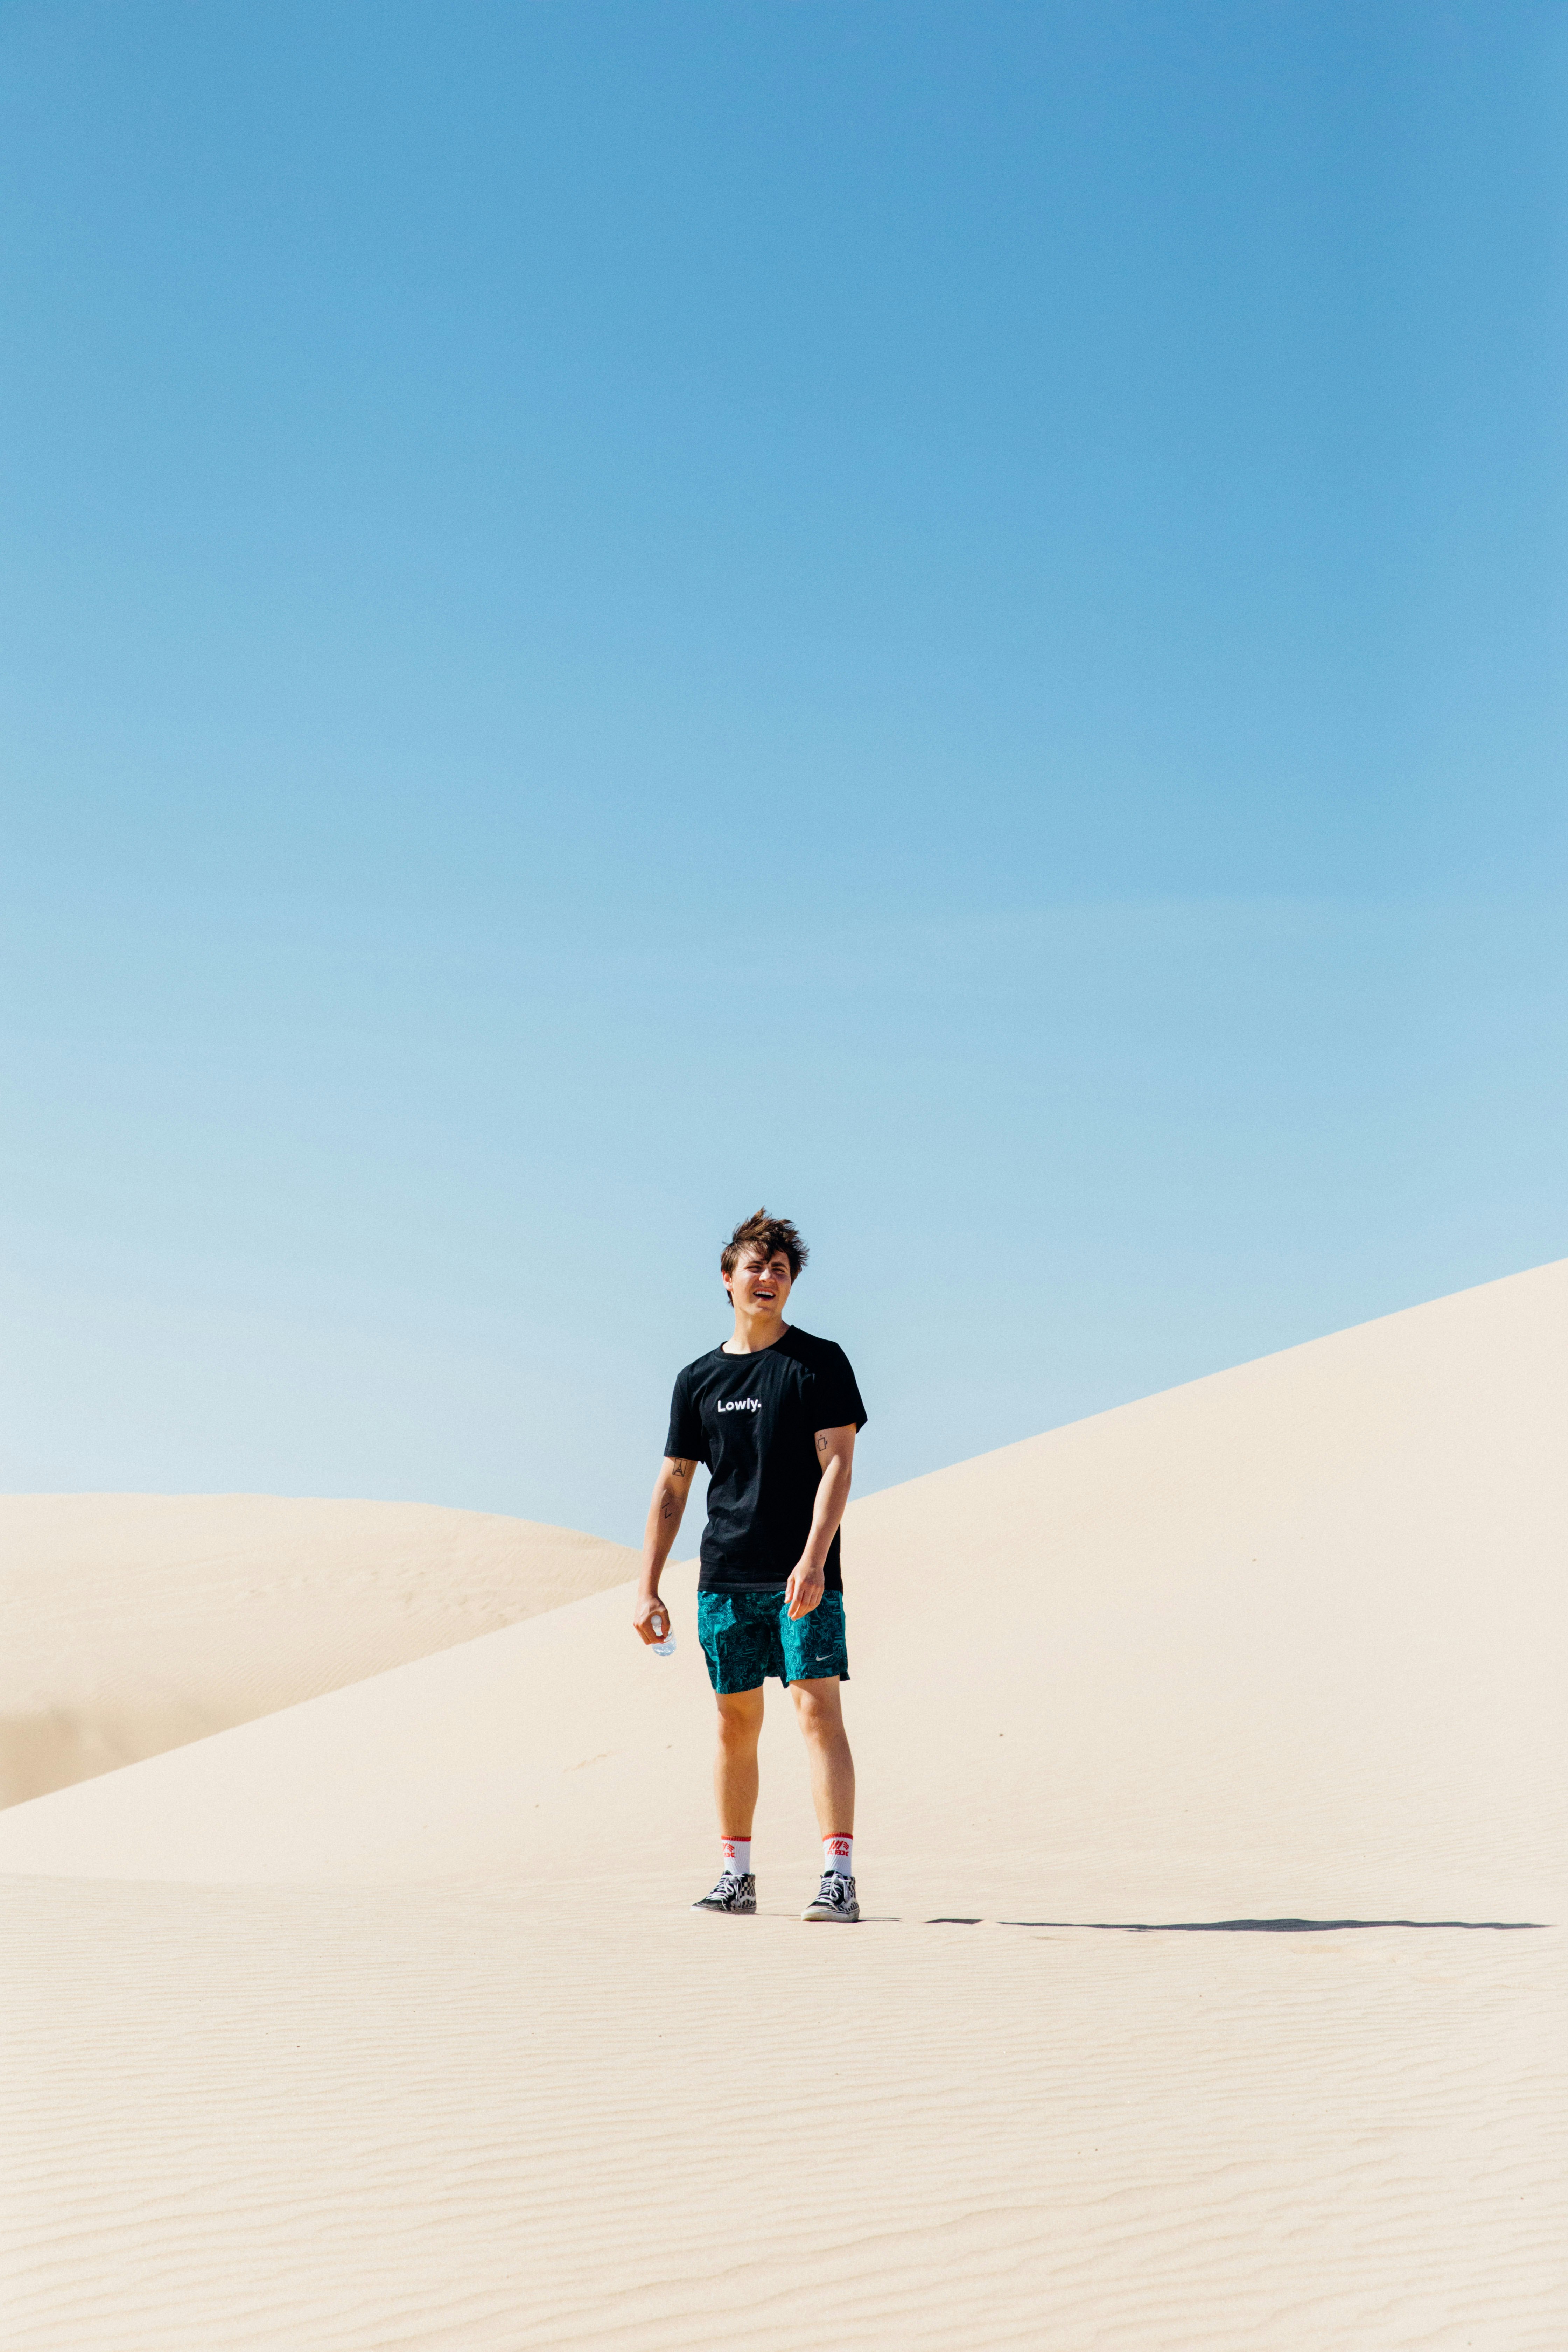 person standing in middle of desert under blue sky